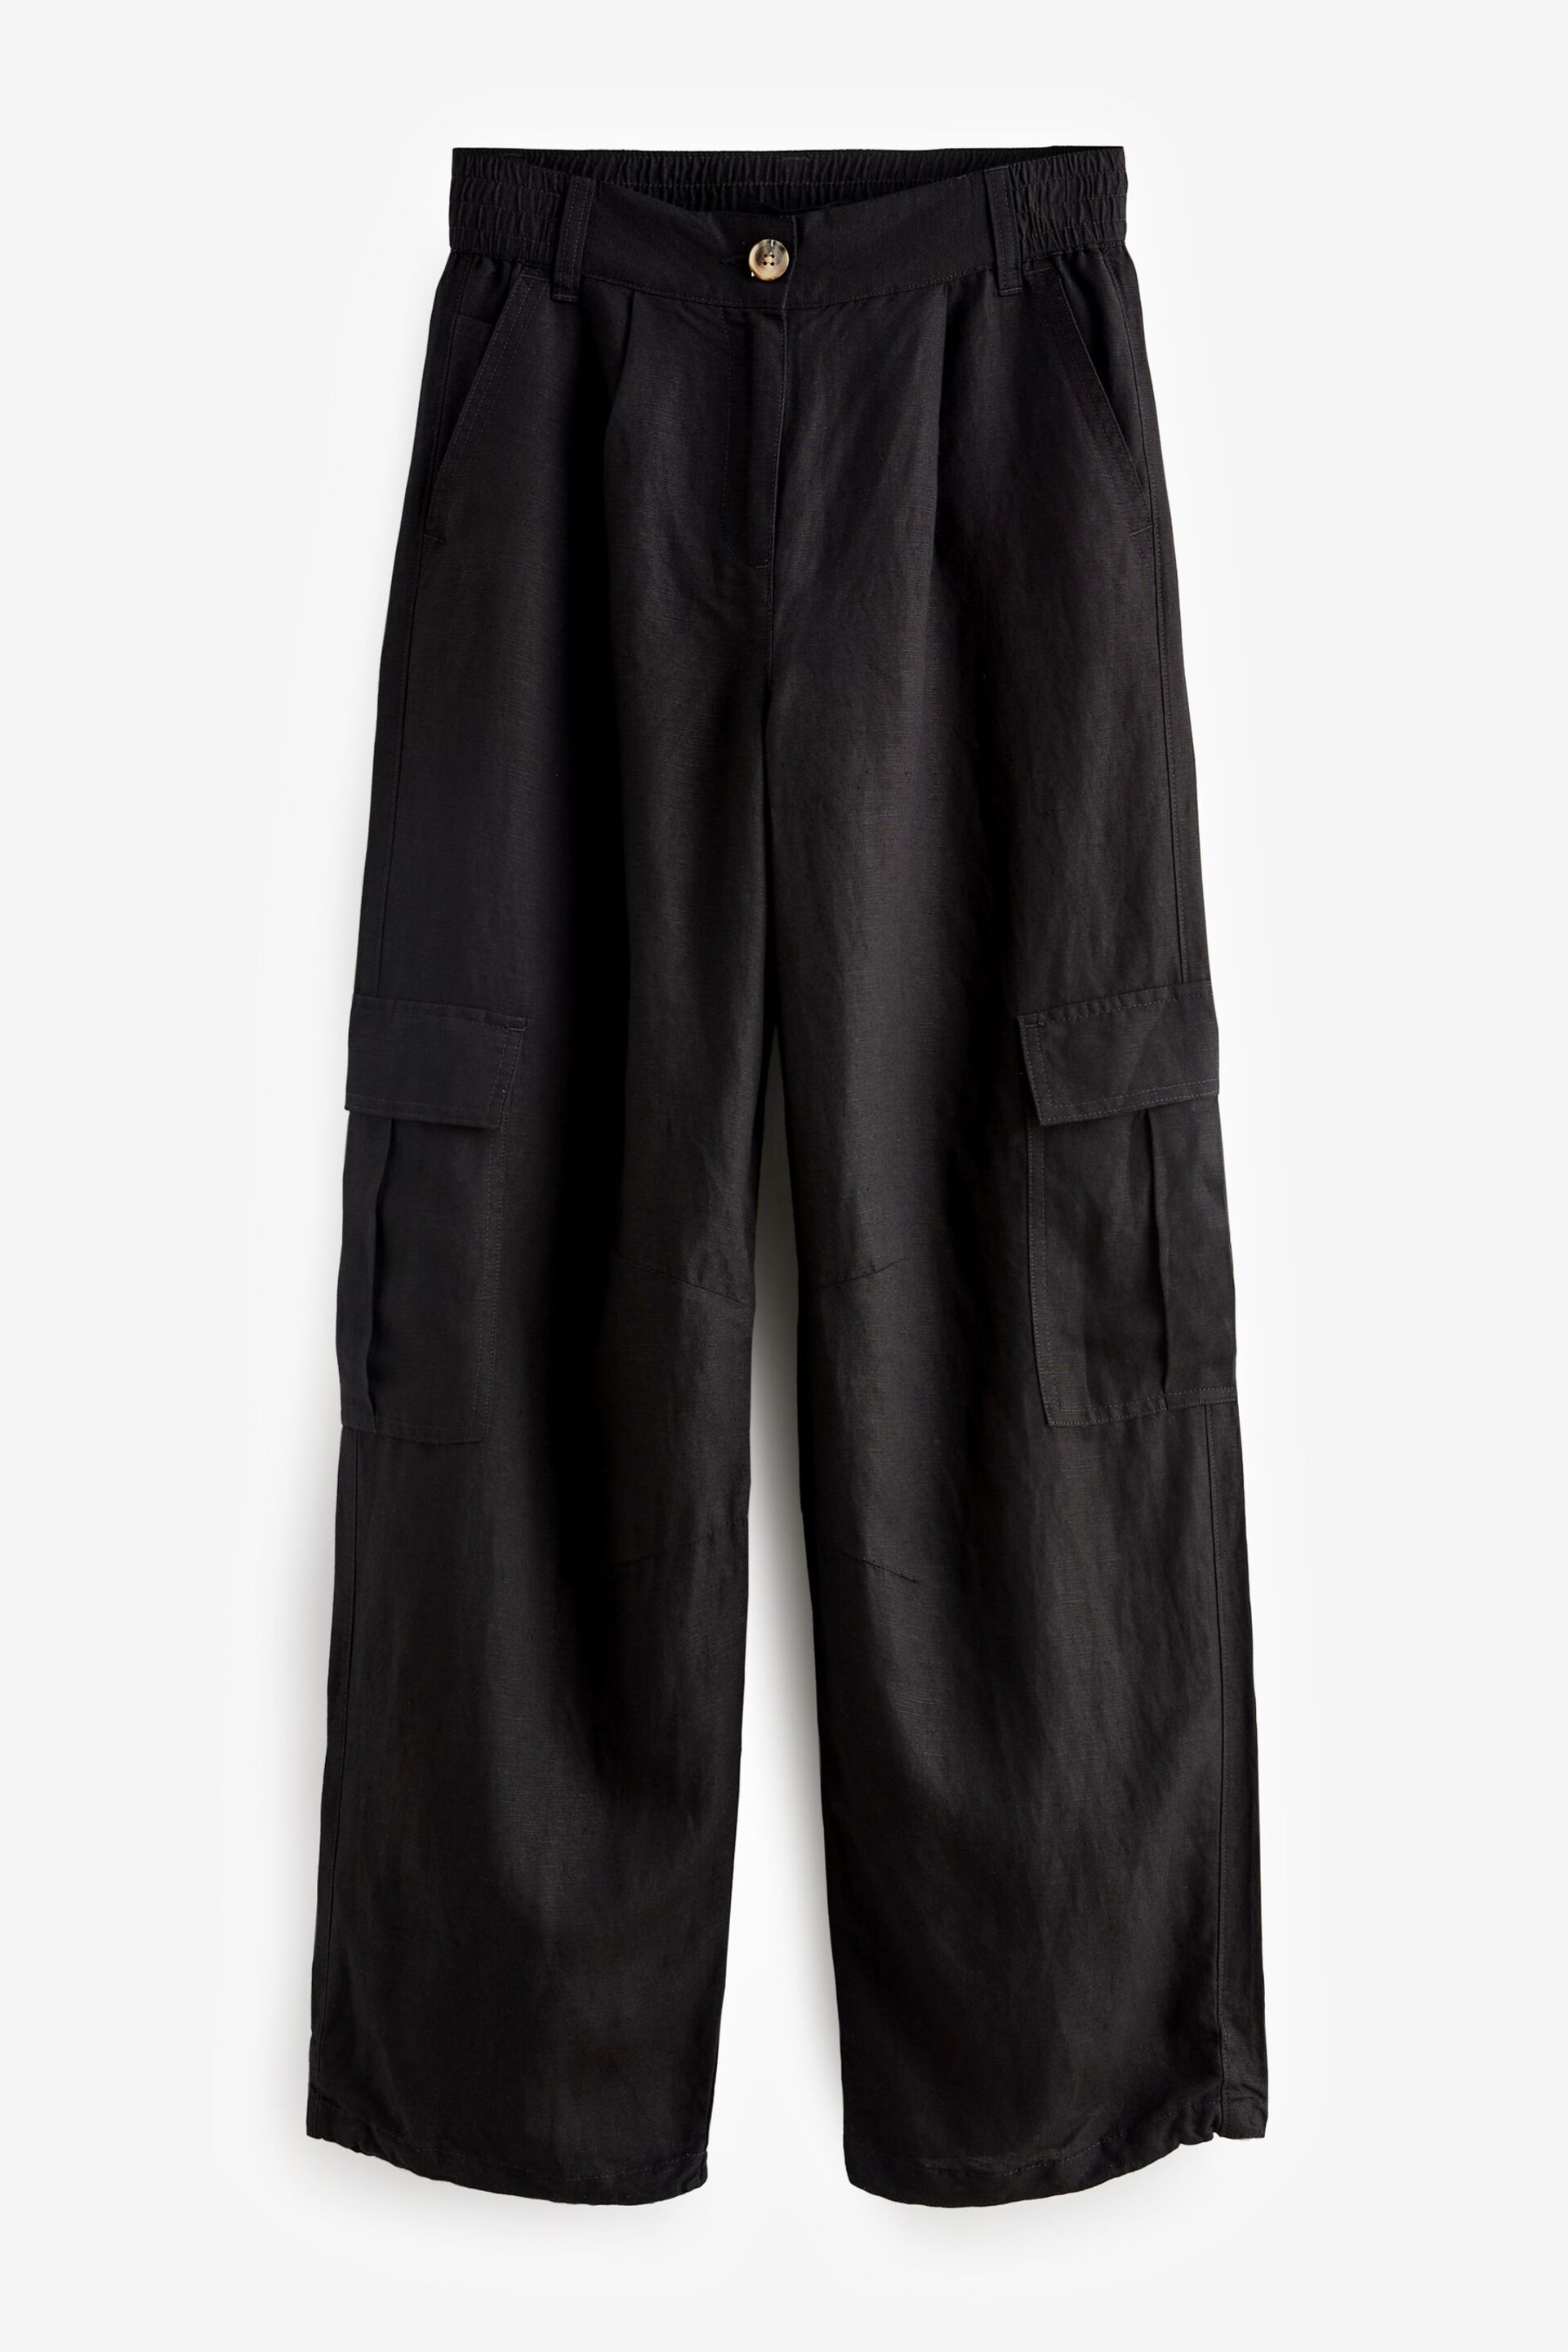 Black Linen Blend Cargo Trousers - Image 6 of 7